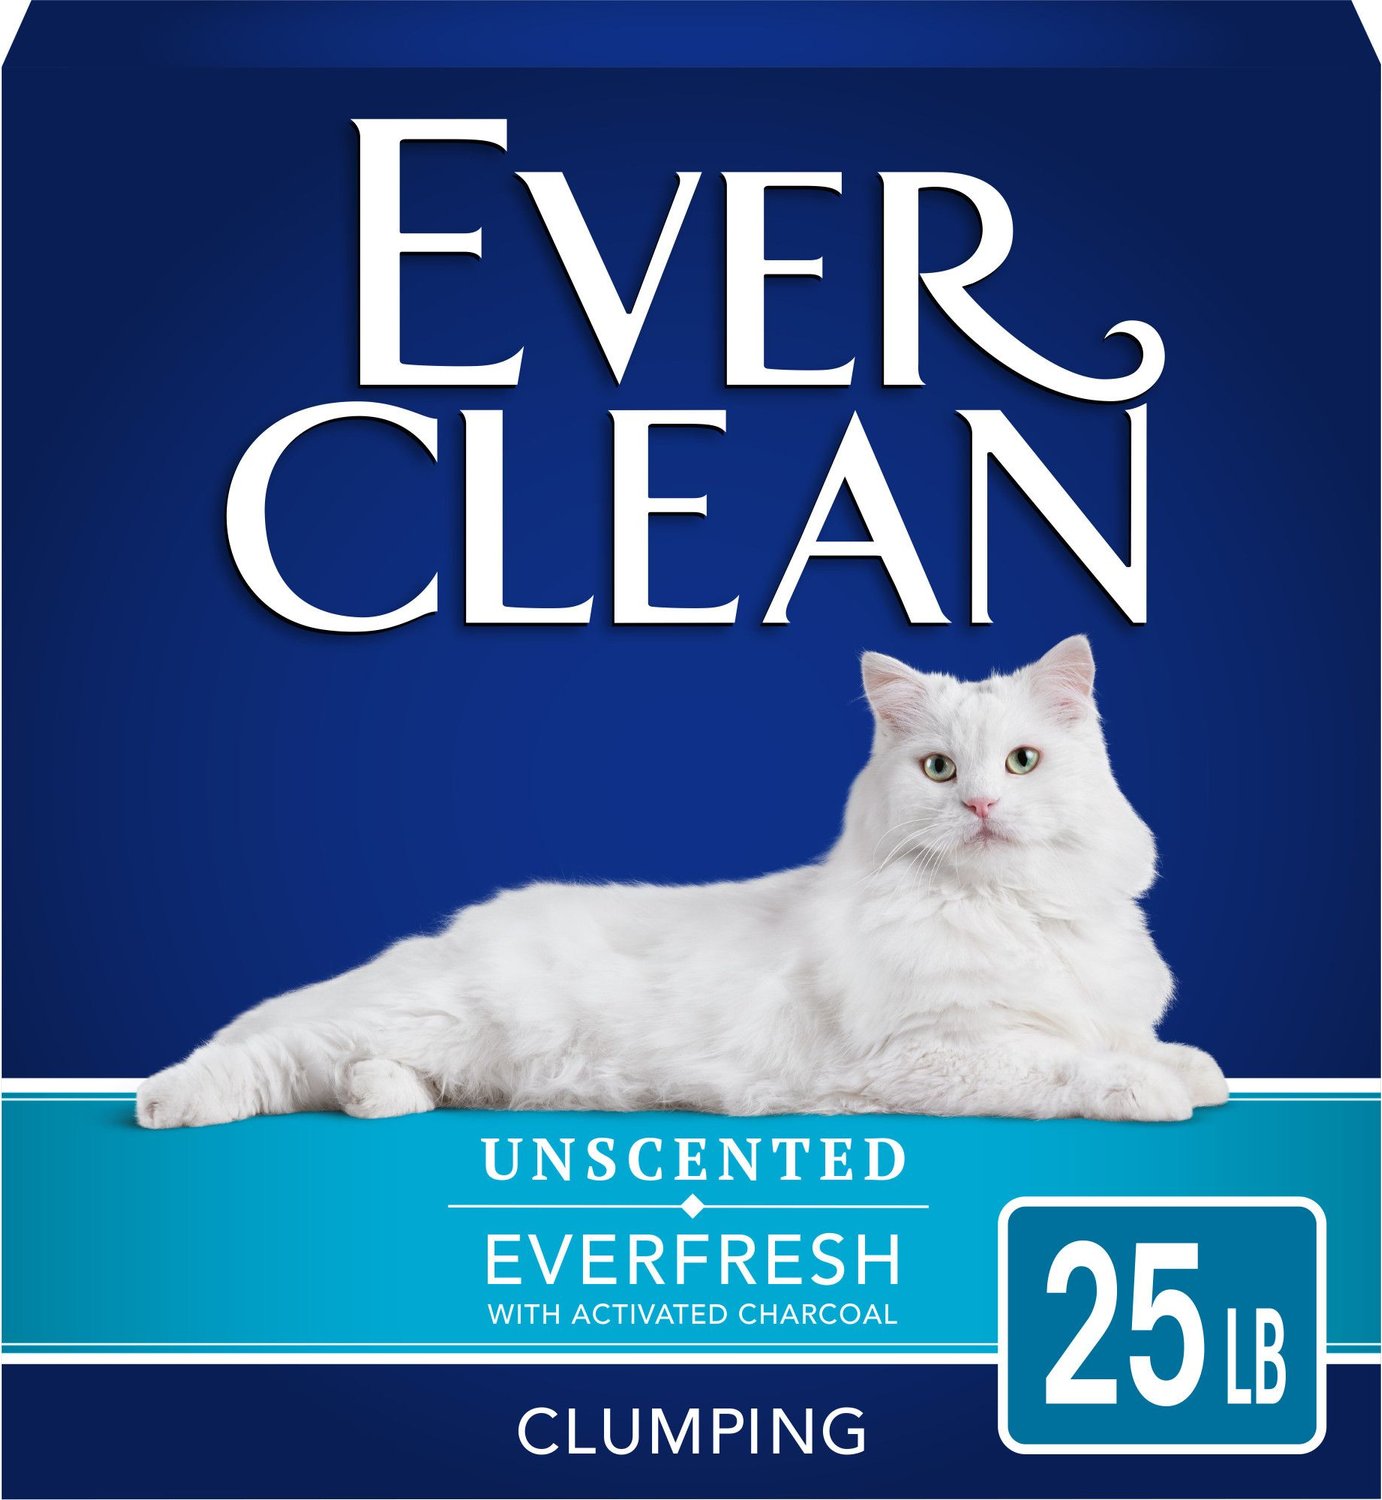 Ever Clean Everfresh with Activated Charcoal Unscented Premium Clumping